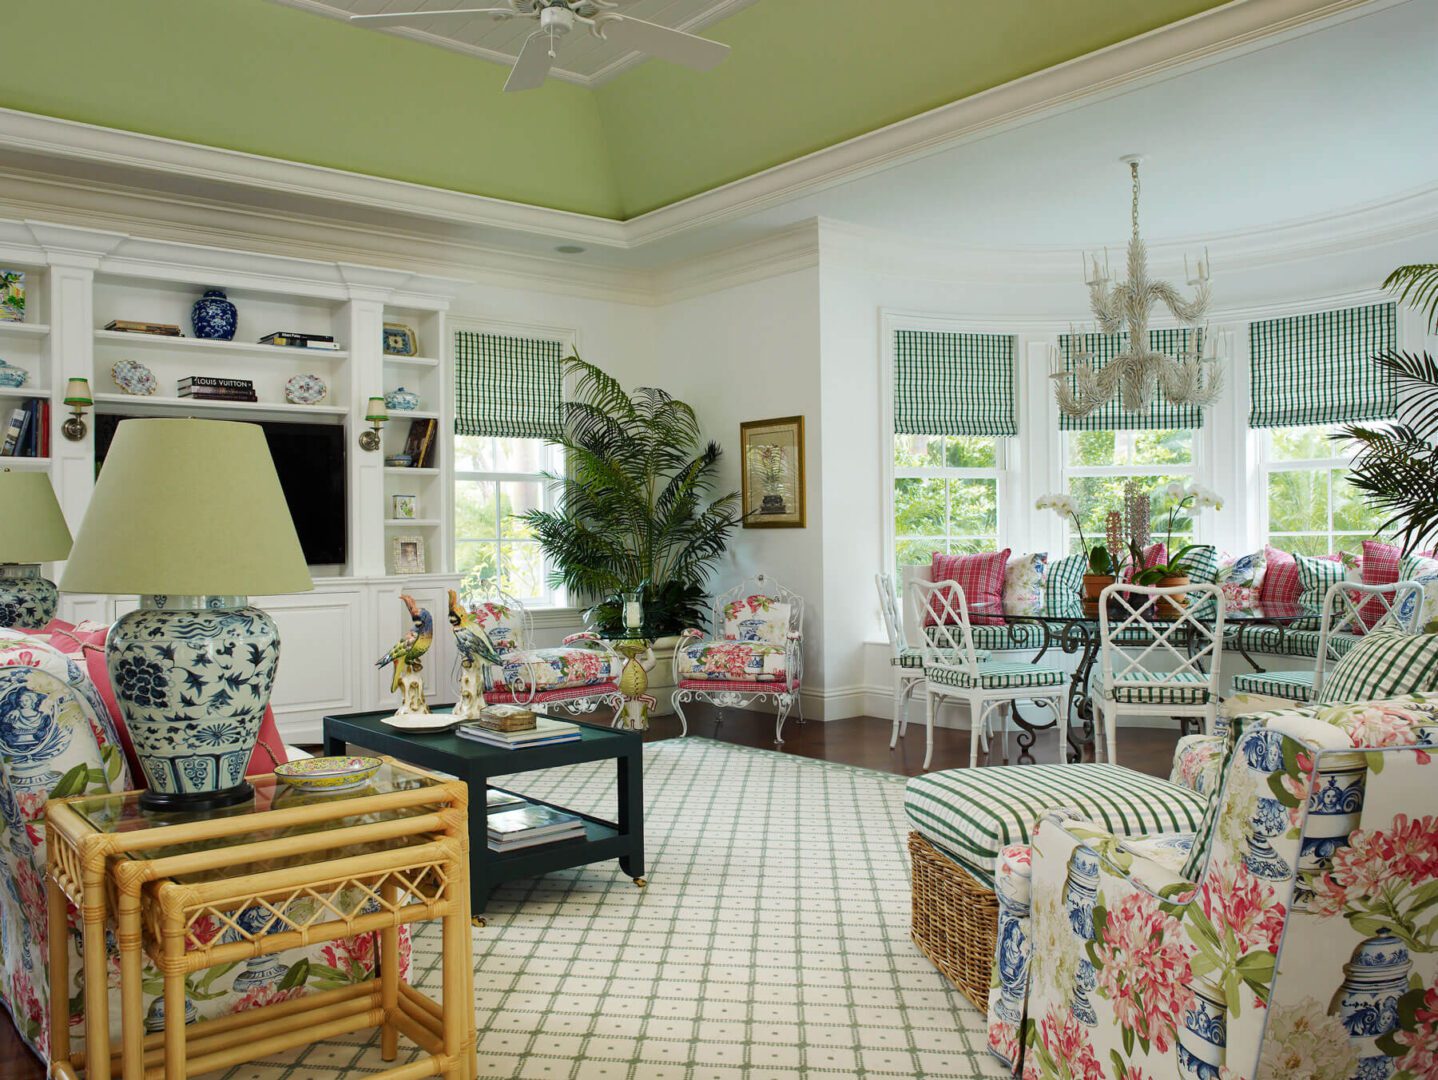 A living room with green walls and white ceiling.